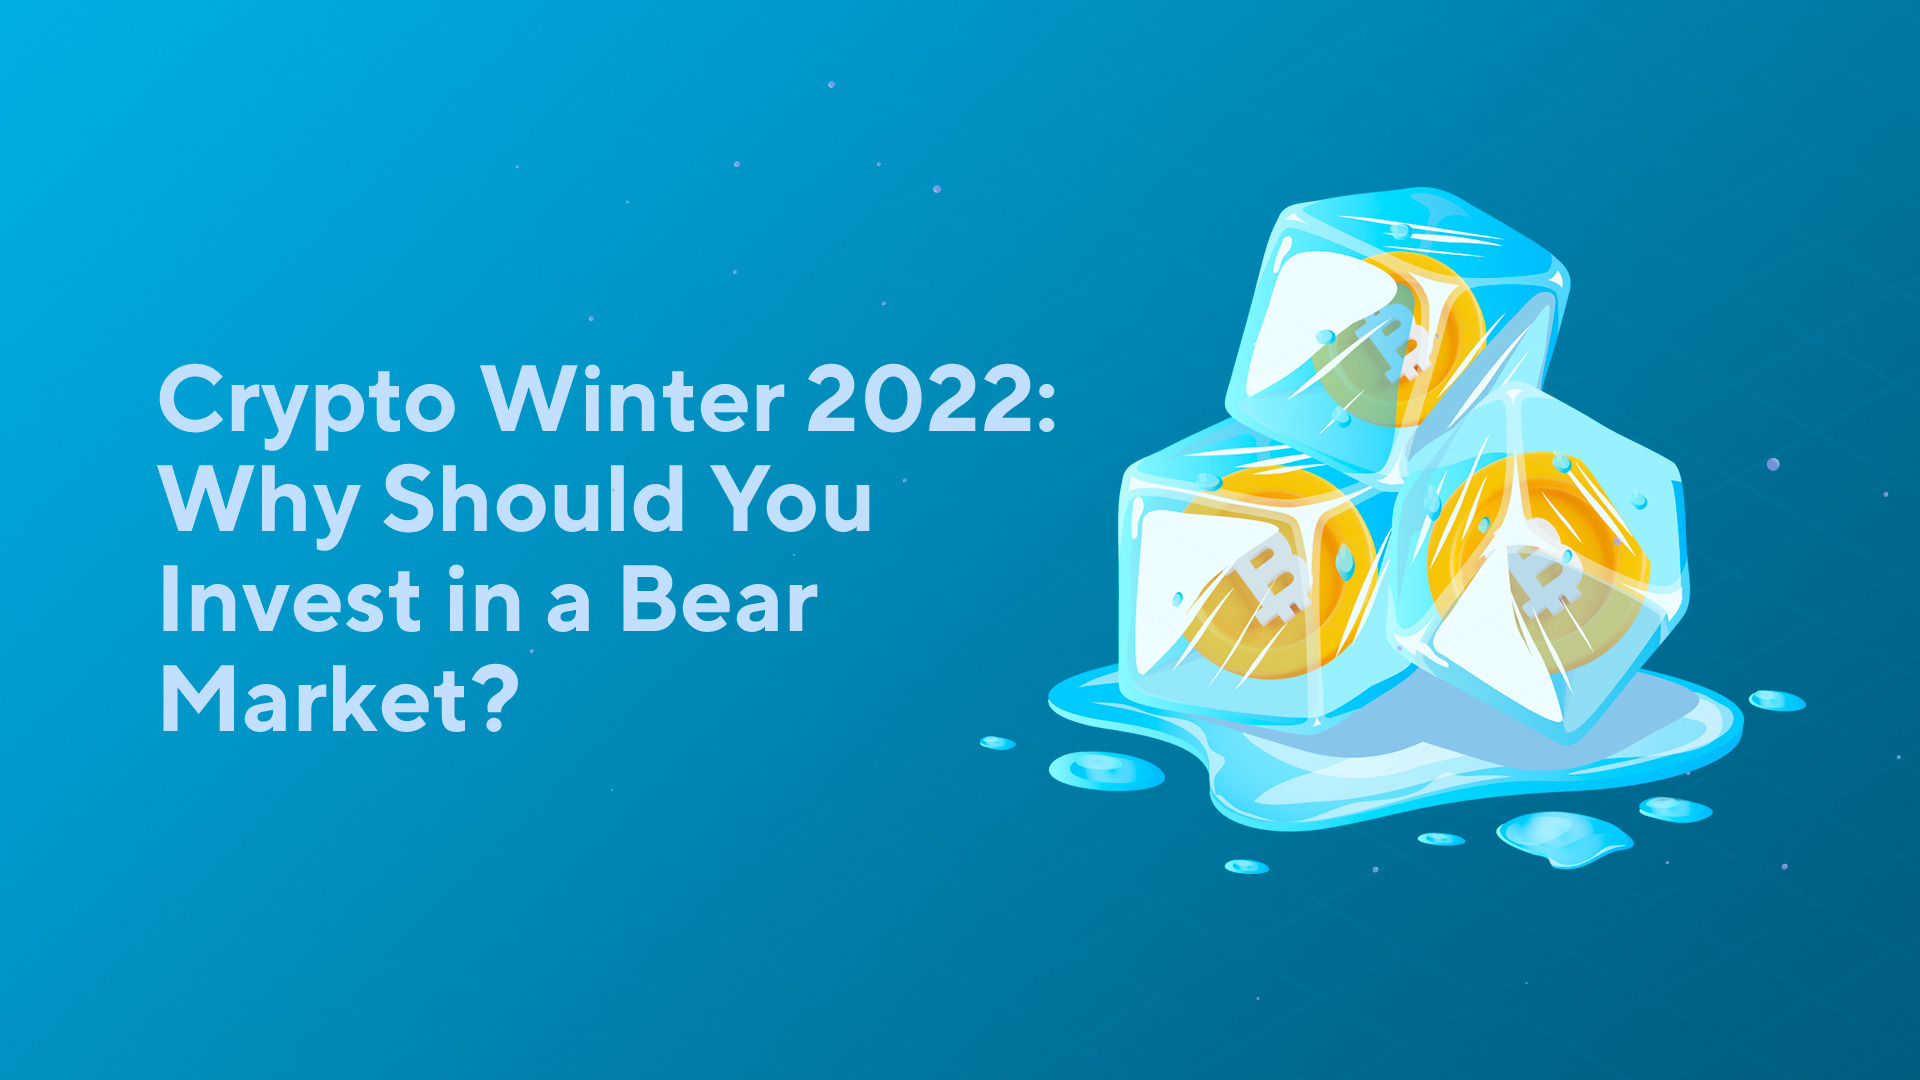 Crypto Winter 2022: Why Should You Invest in a Bear Market?